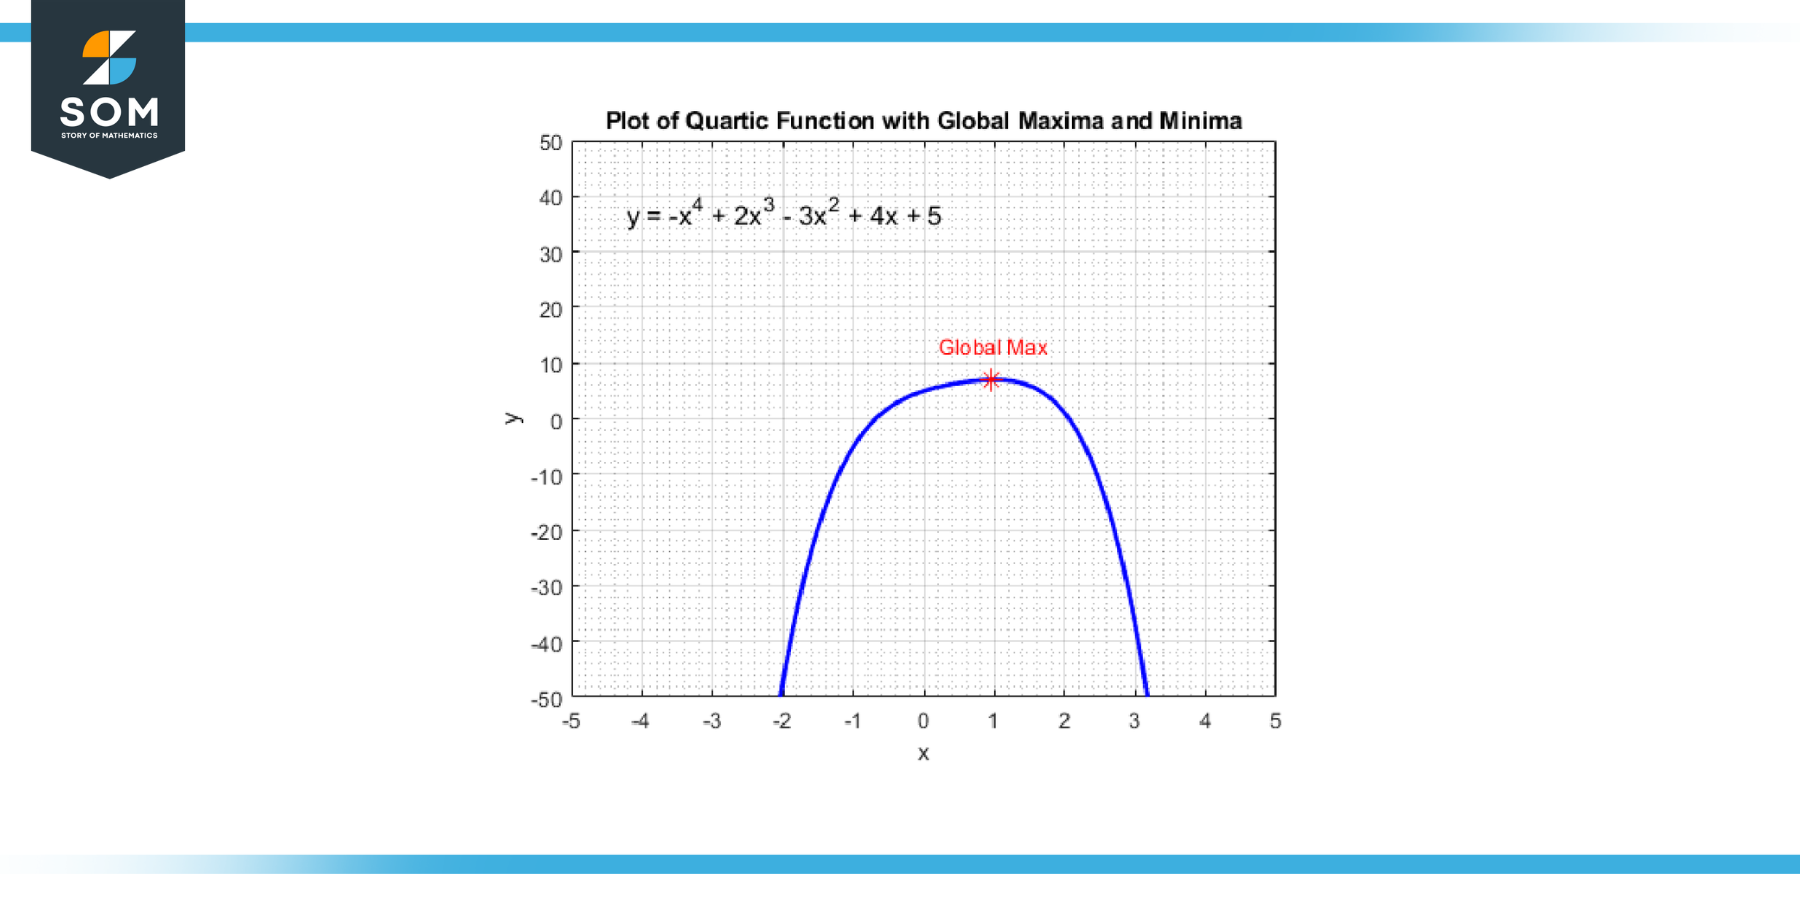 Global maxima and global minima for a generic quartic function